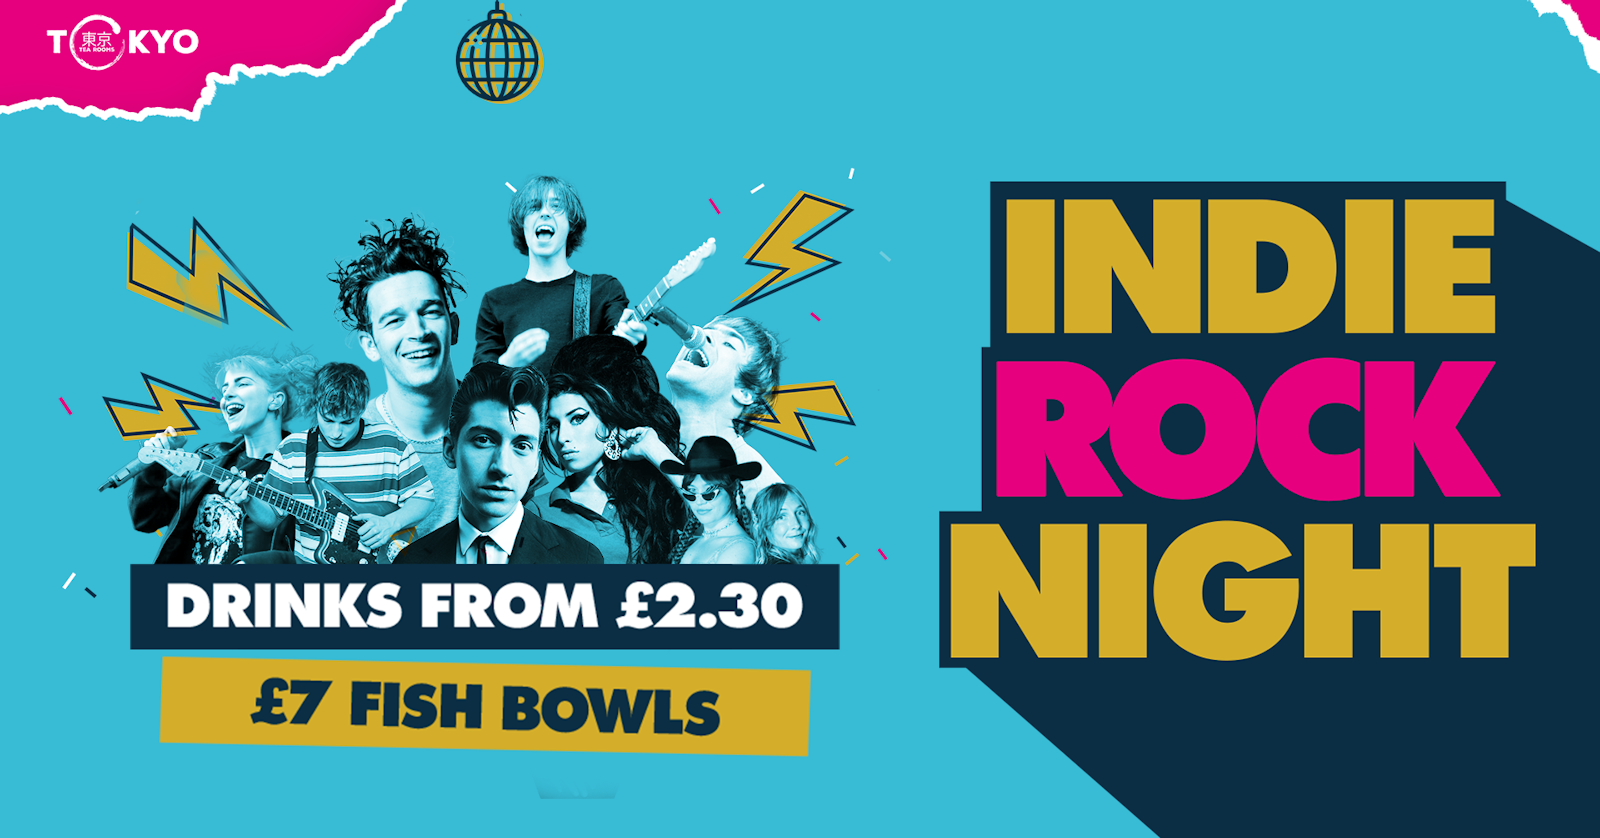 Indie Rock Night *ONLY 10 £3 TICKETS LEFT*